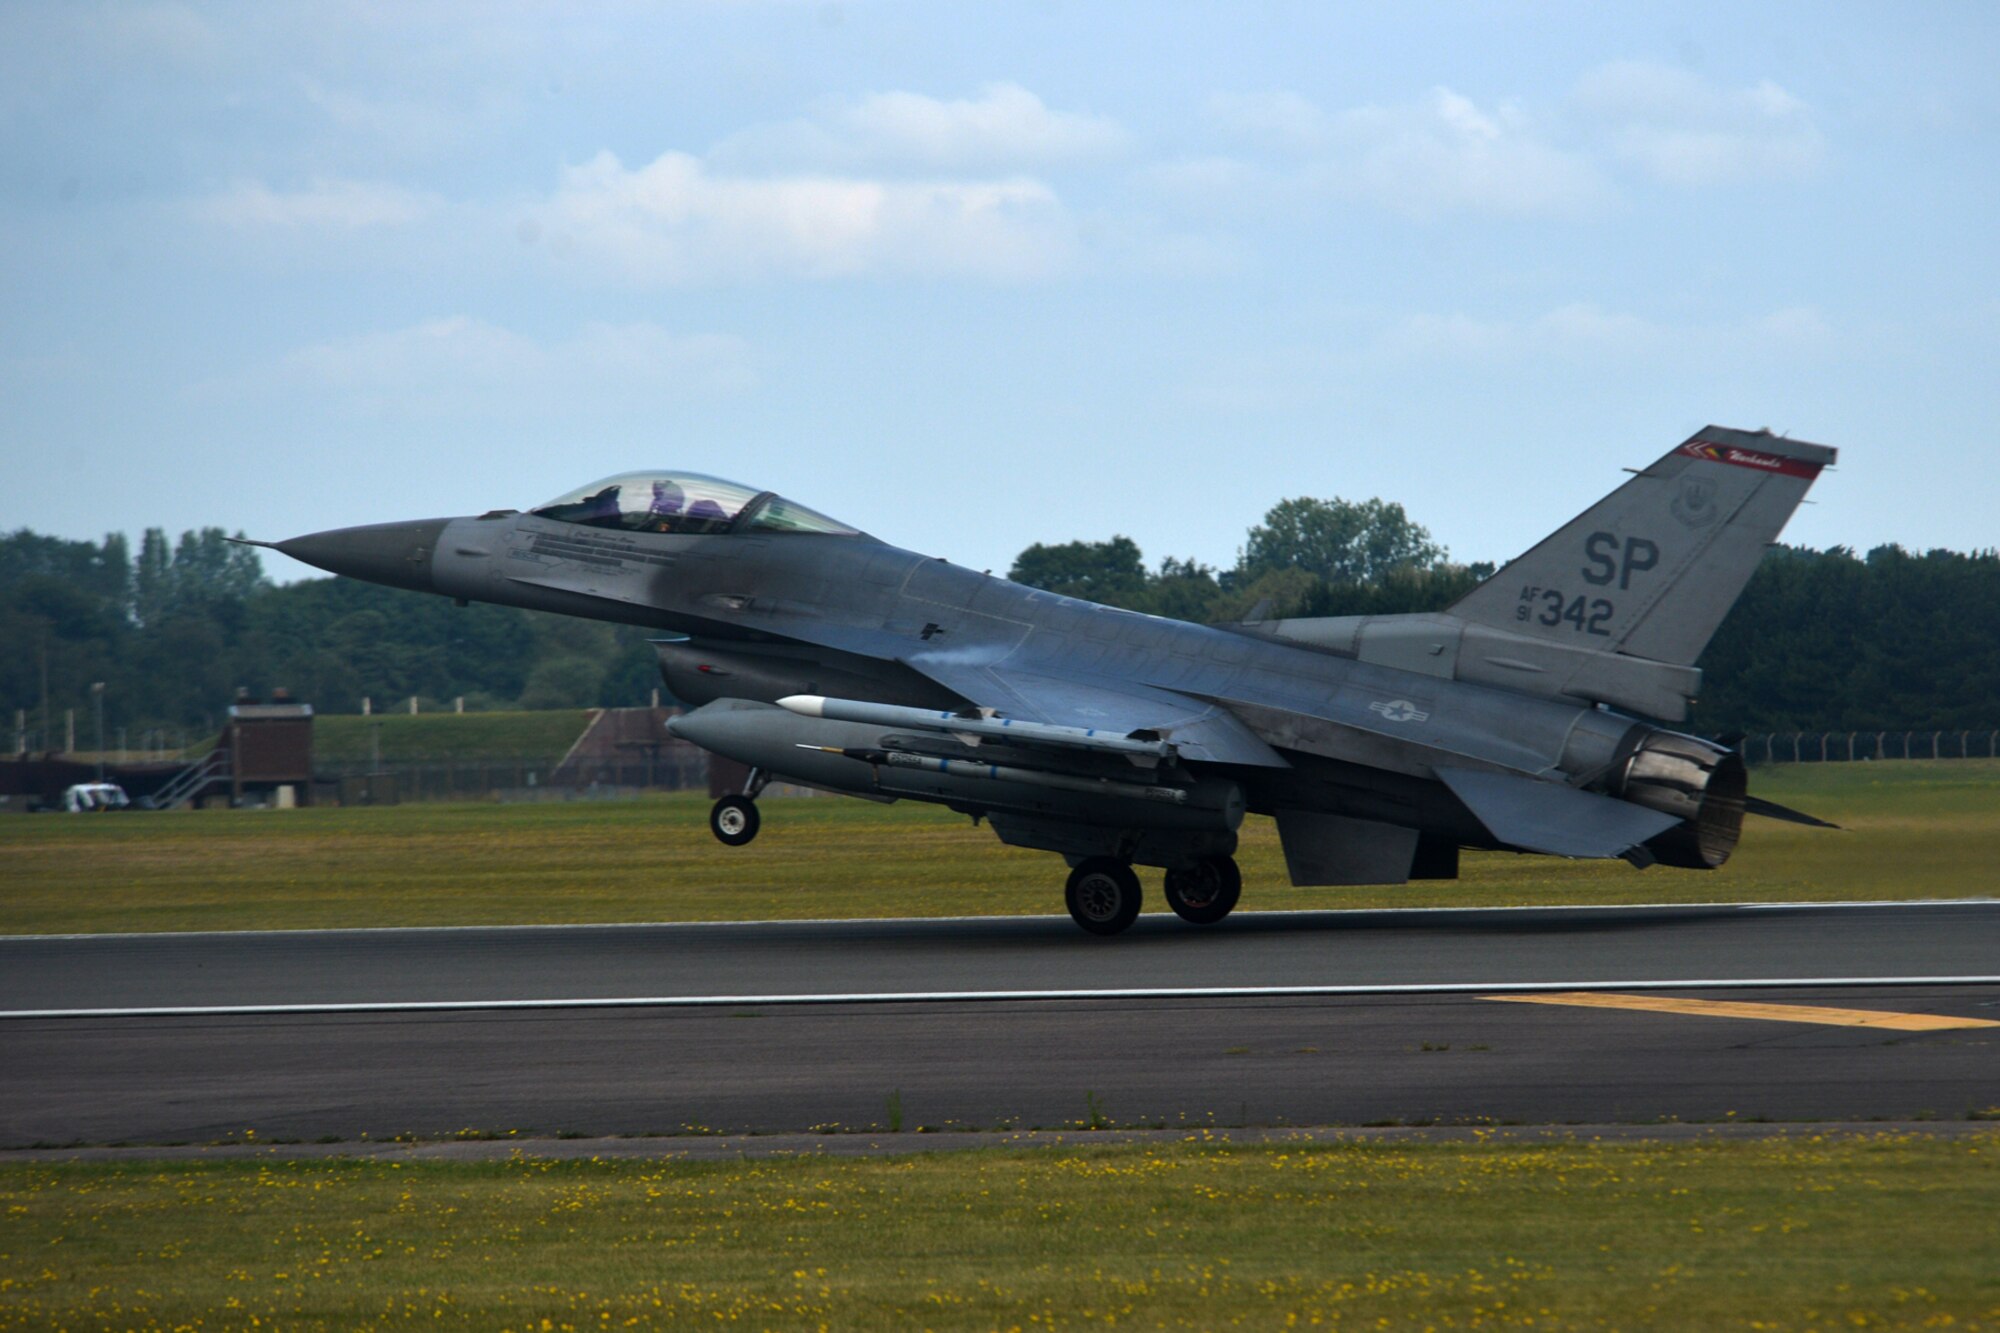 An F-16 Fighting Falcon from the 52nd Fighter Wing at Spangdahlem Air Base, Germany, lands at Royal Air Force Lakenheath, England, July 10. More than 260 Airmen and 18 F-16 Fighting Falcon aircraft from the 52nd FS will be participating in a flying training deployment here. (U.S. Air Force photo/Master Sgt. Eric Burks)